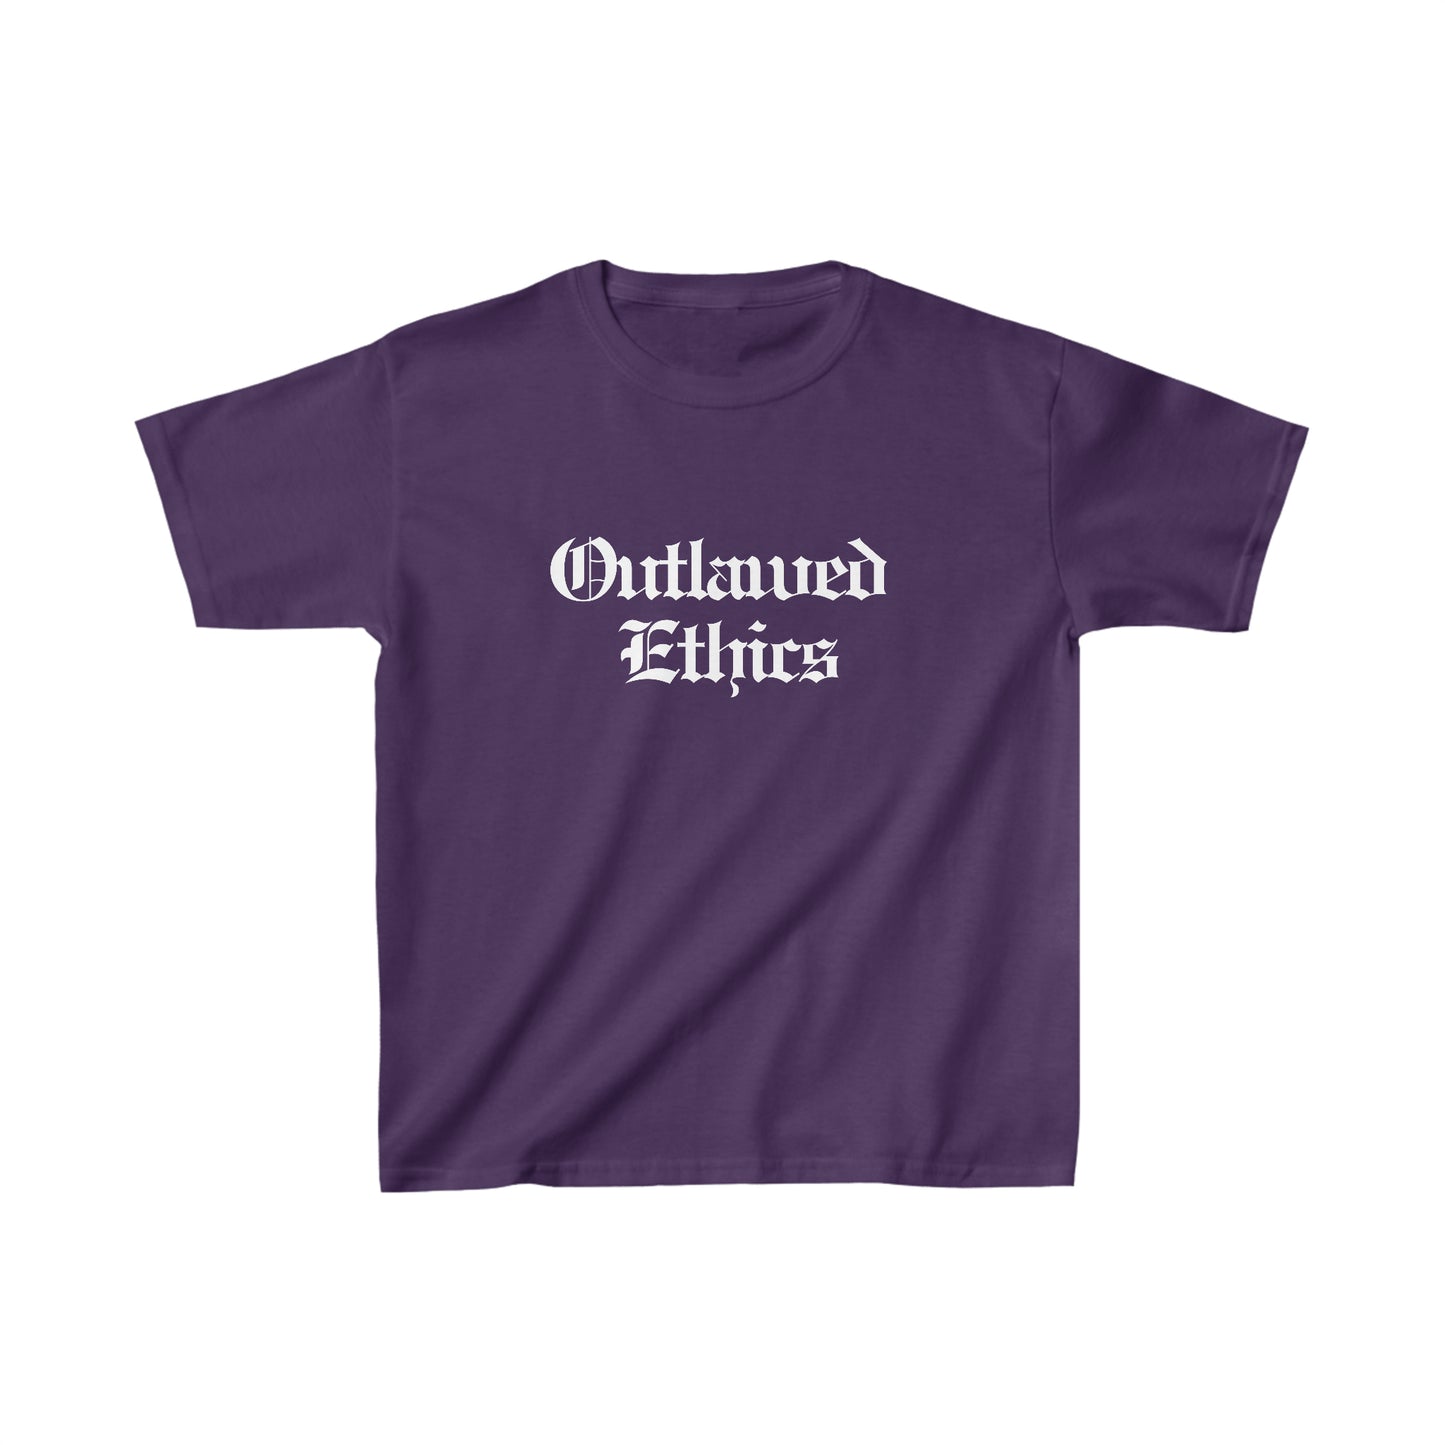 Rep Outlawed Ethics Kids Graphic Tee